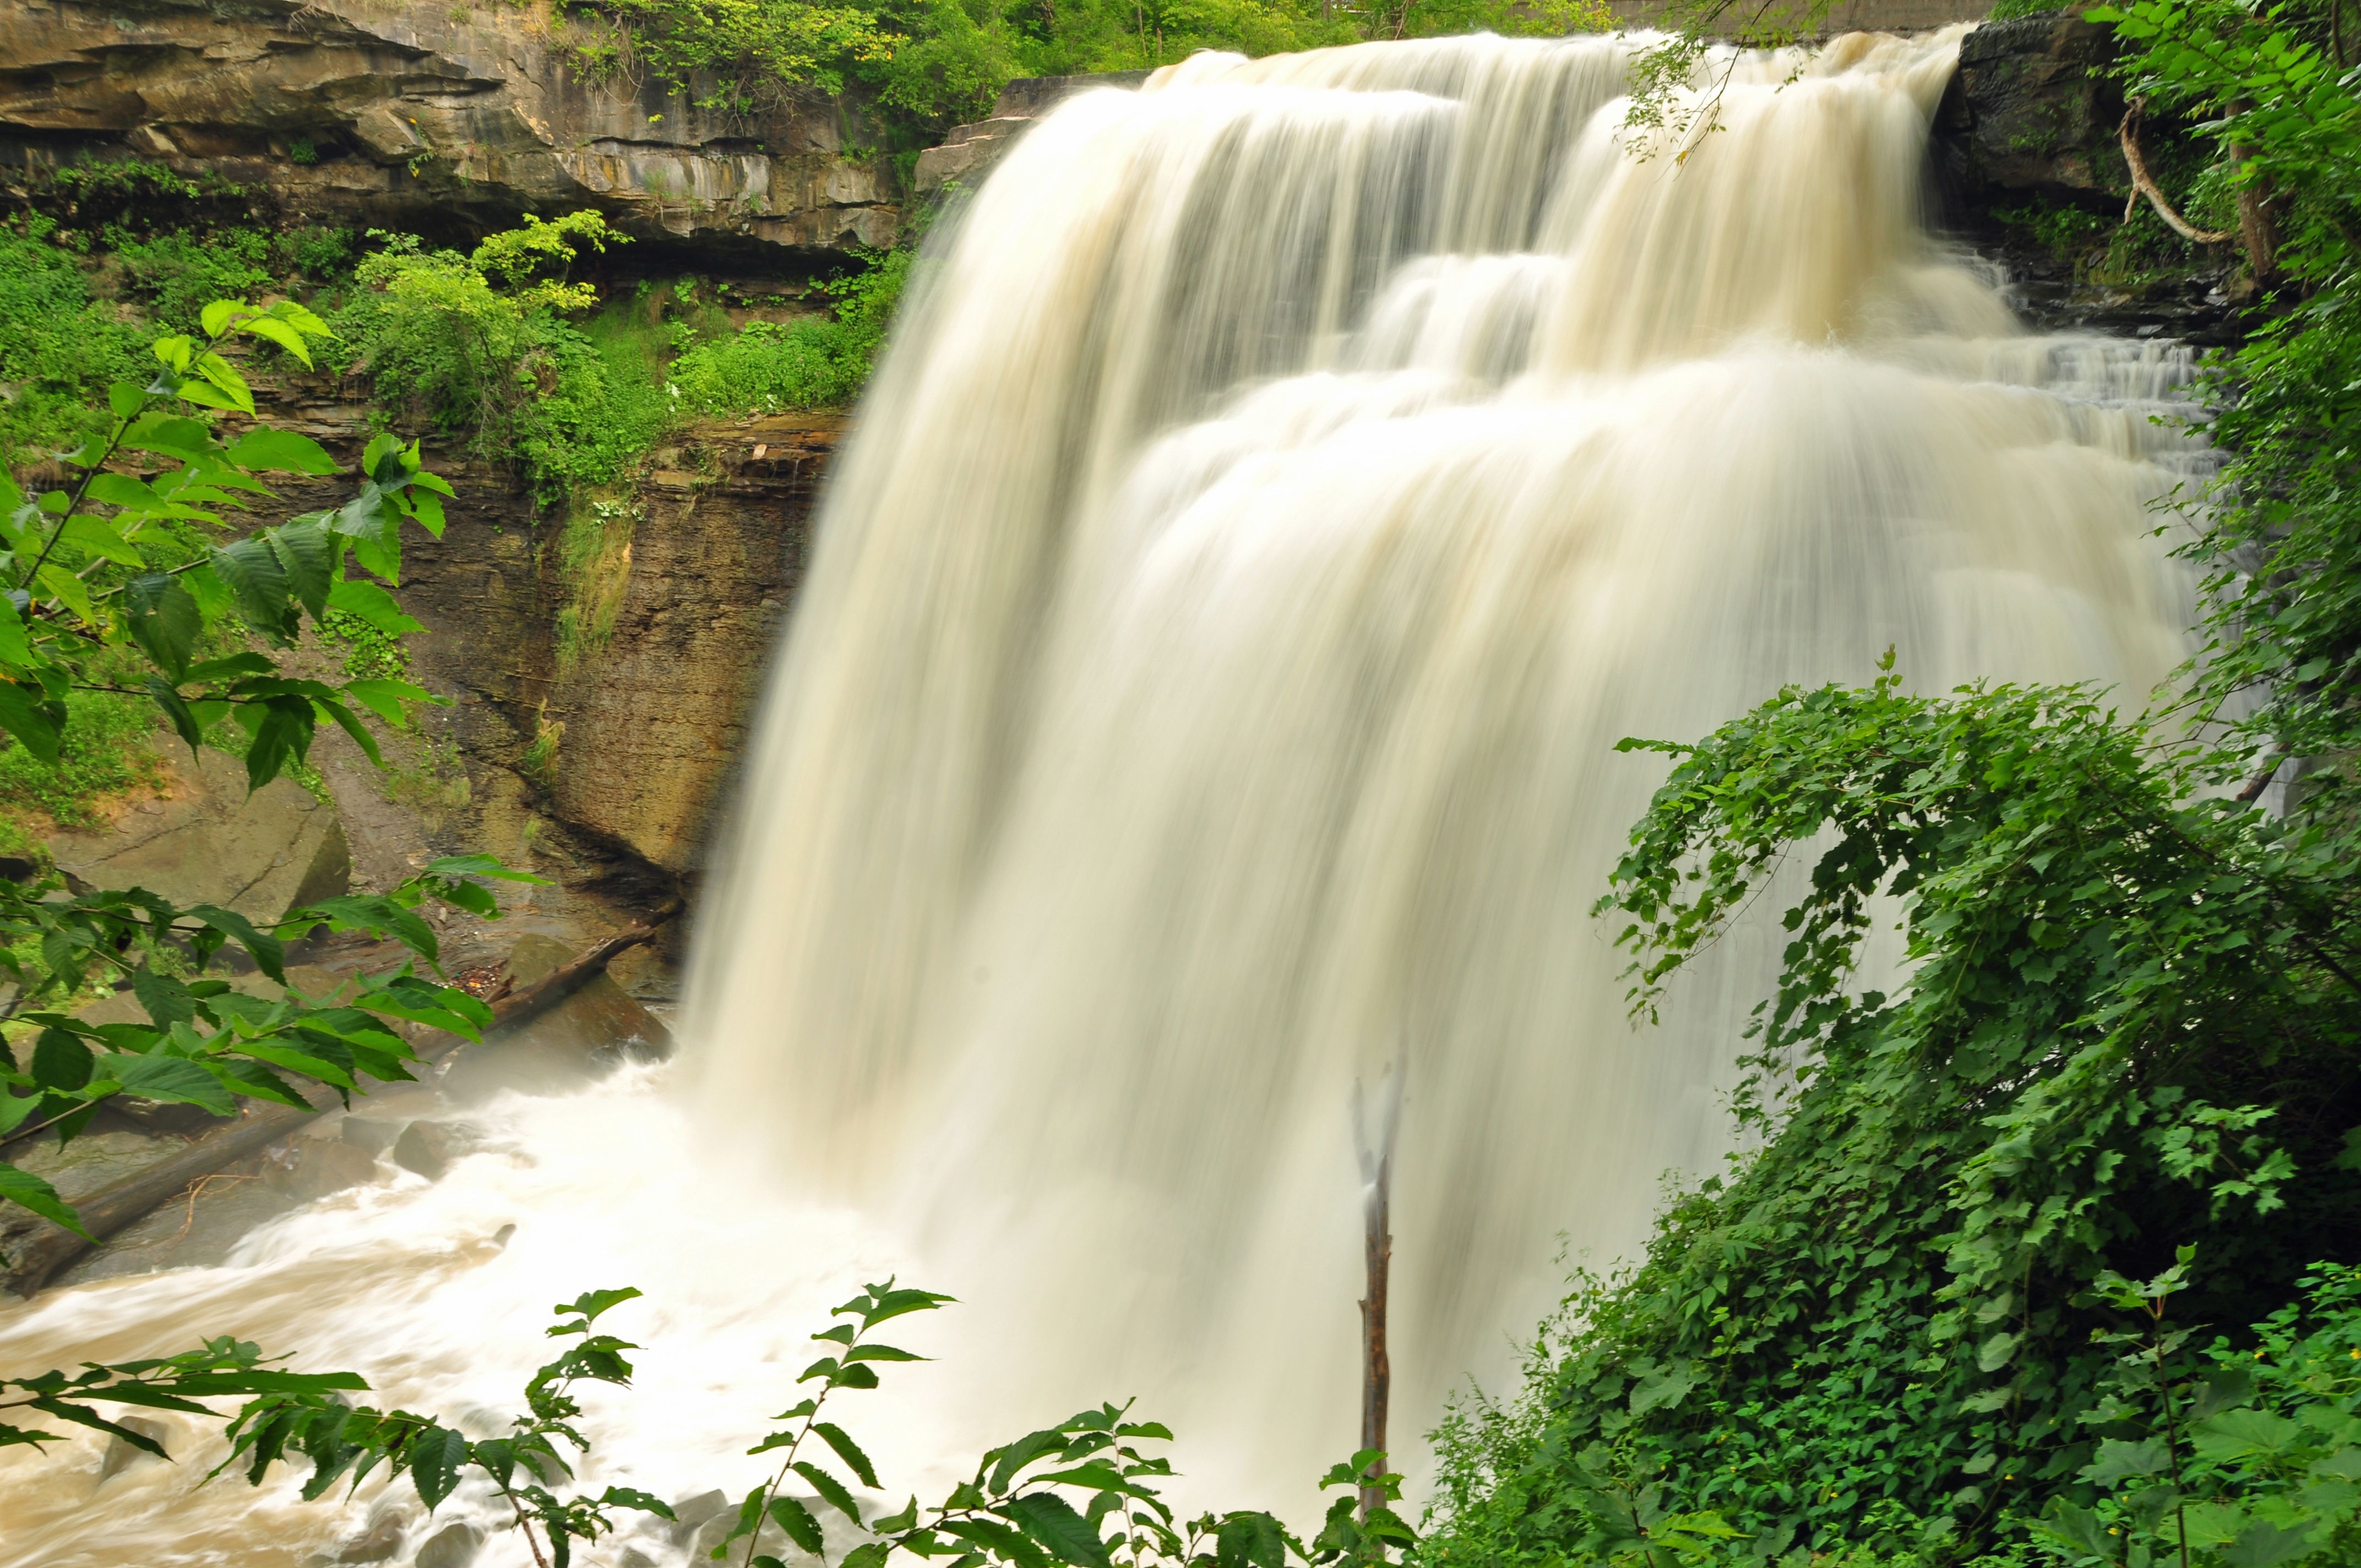 Cuyahoga Valley National Park: 10th Most Visited U.S. National